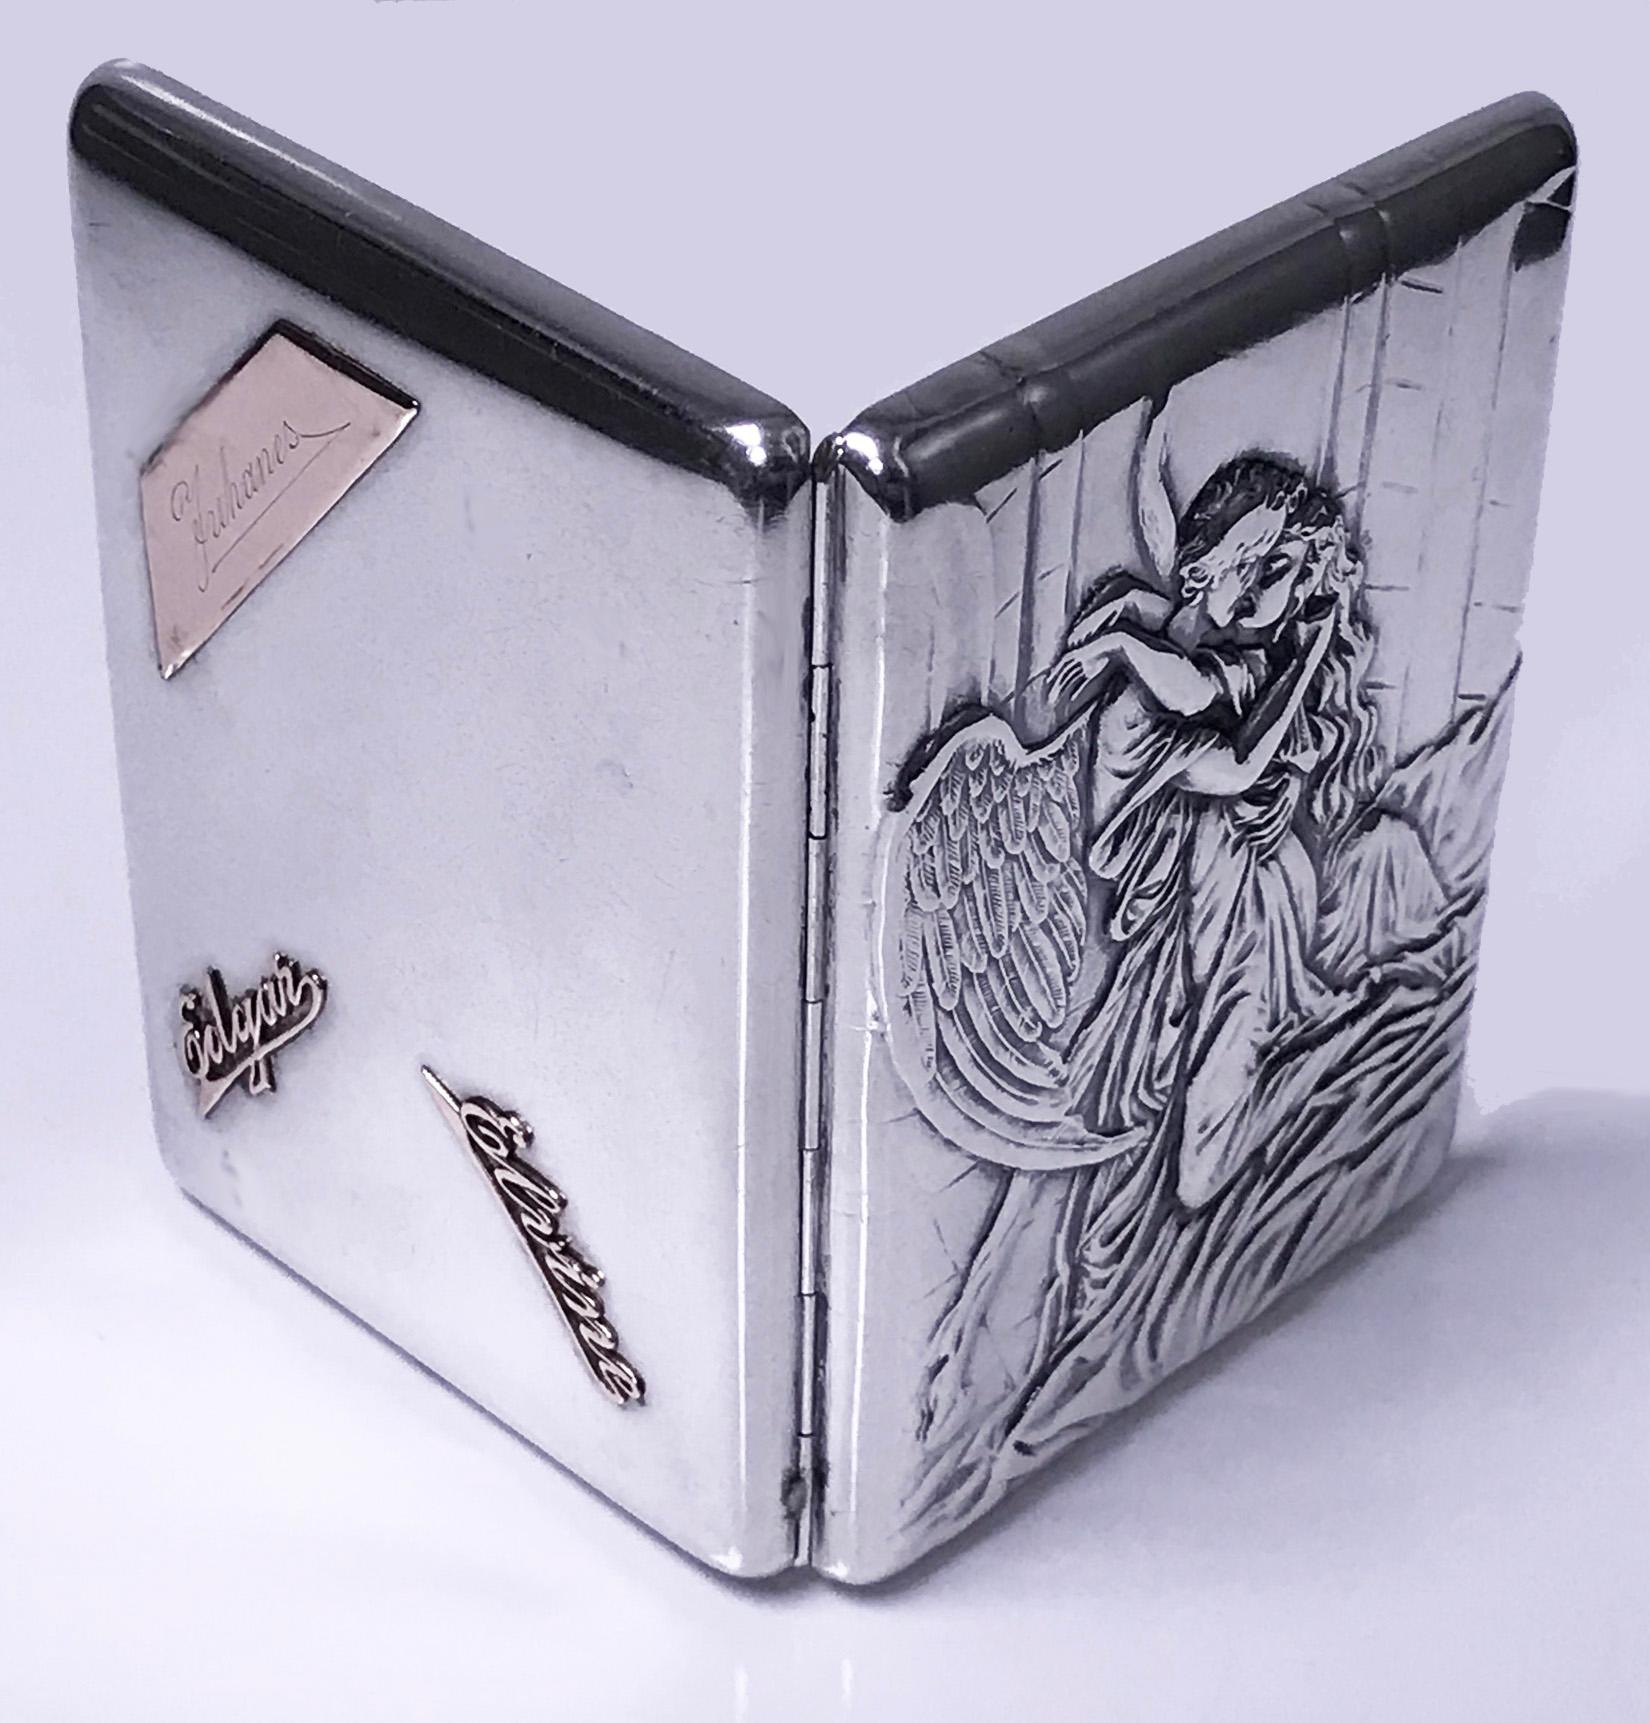 Russian silver cigarette case box, Konstantin Skvortsov, Moscow, 1887-1908 depicting Hermes Seduction of Aphrodite. The rectangular case with embossed raised relief depicting Hermes Seduction of Aphrodite, cabochon green stone thumb piece. The